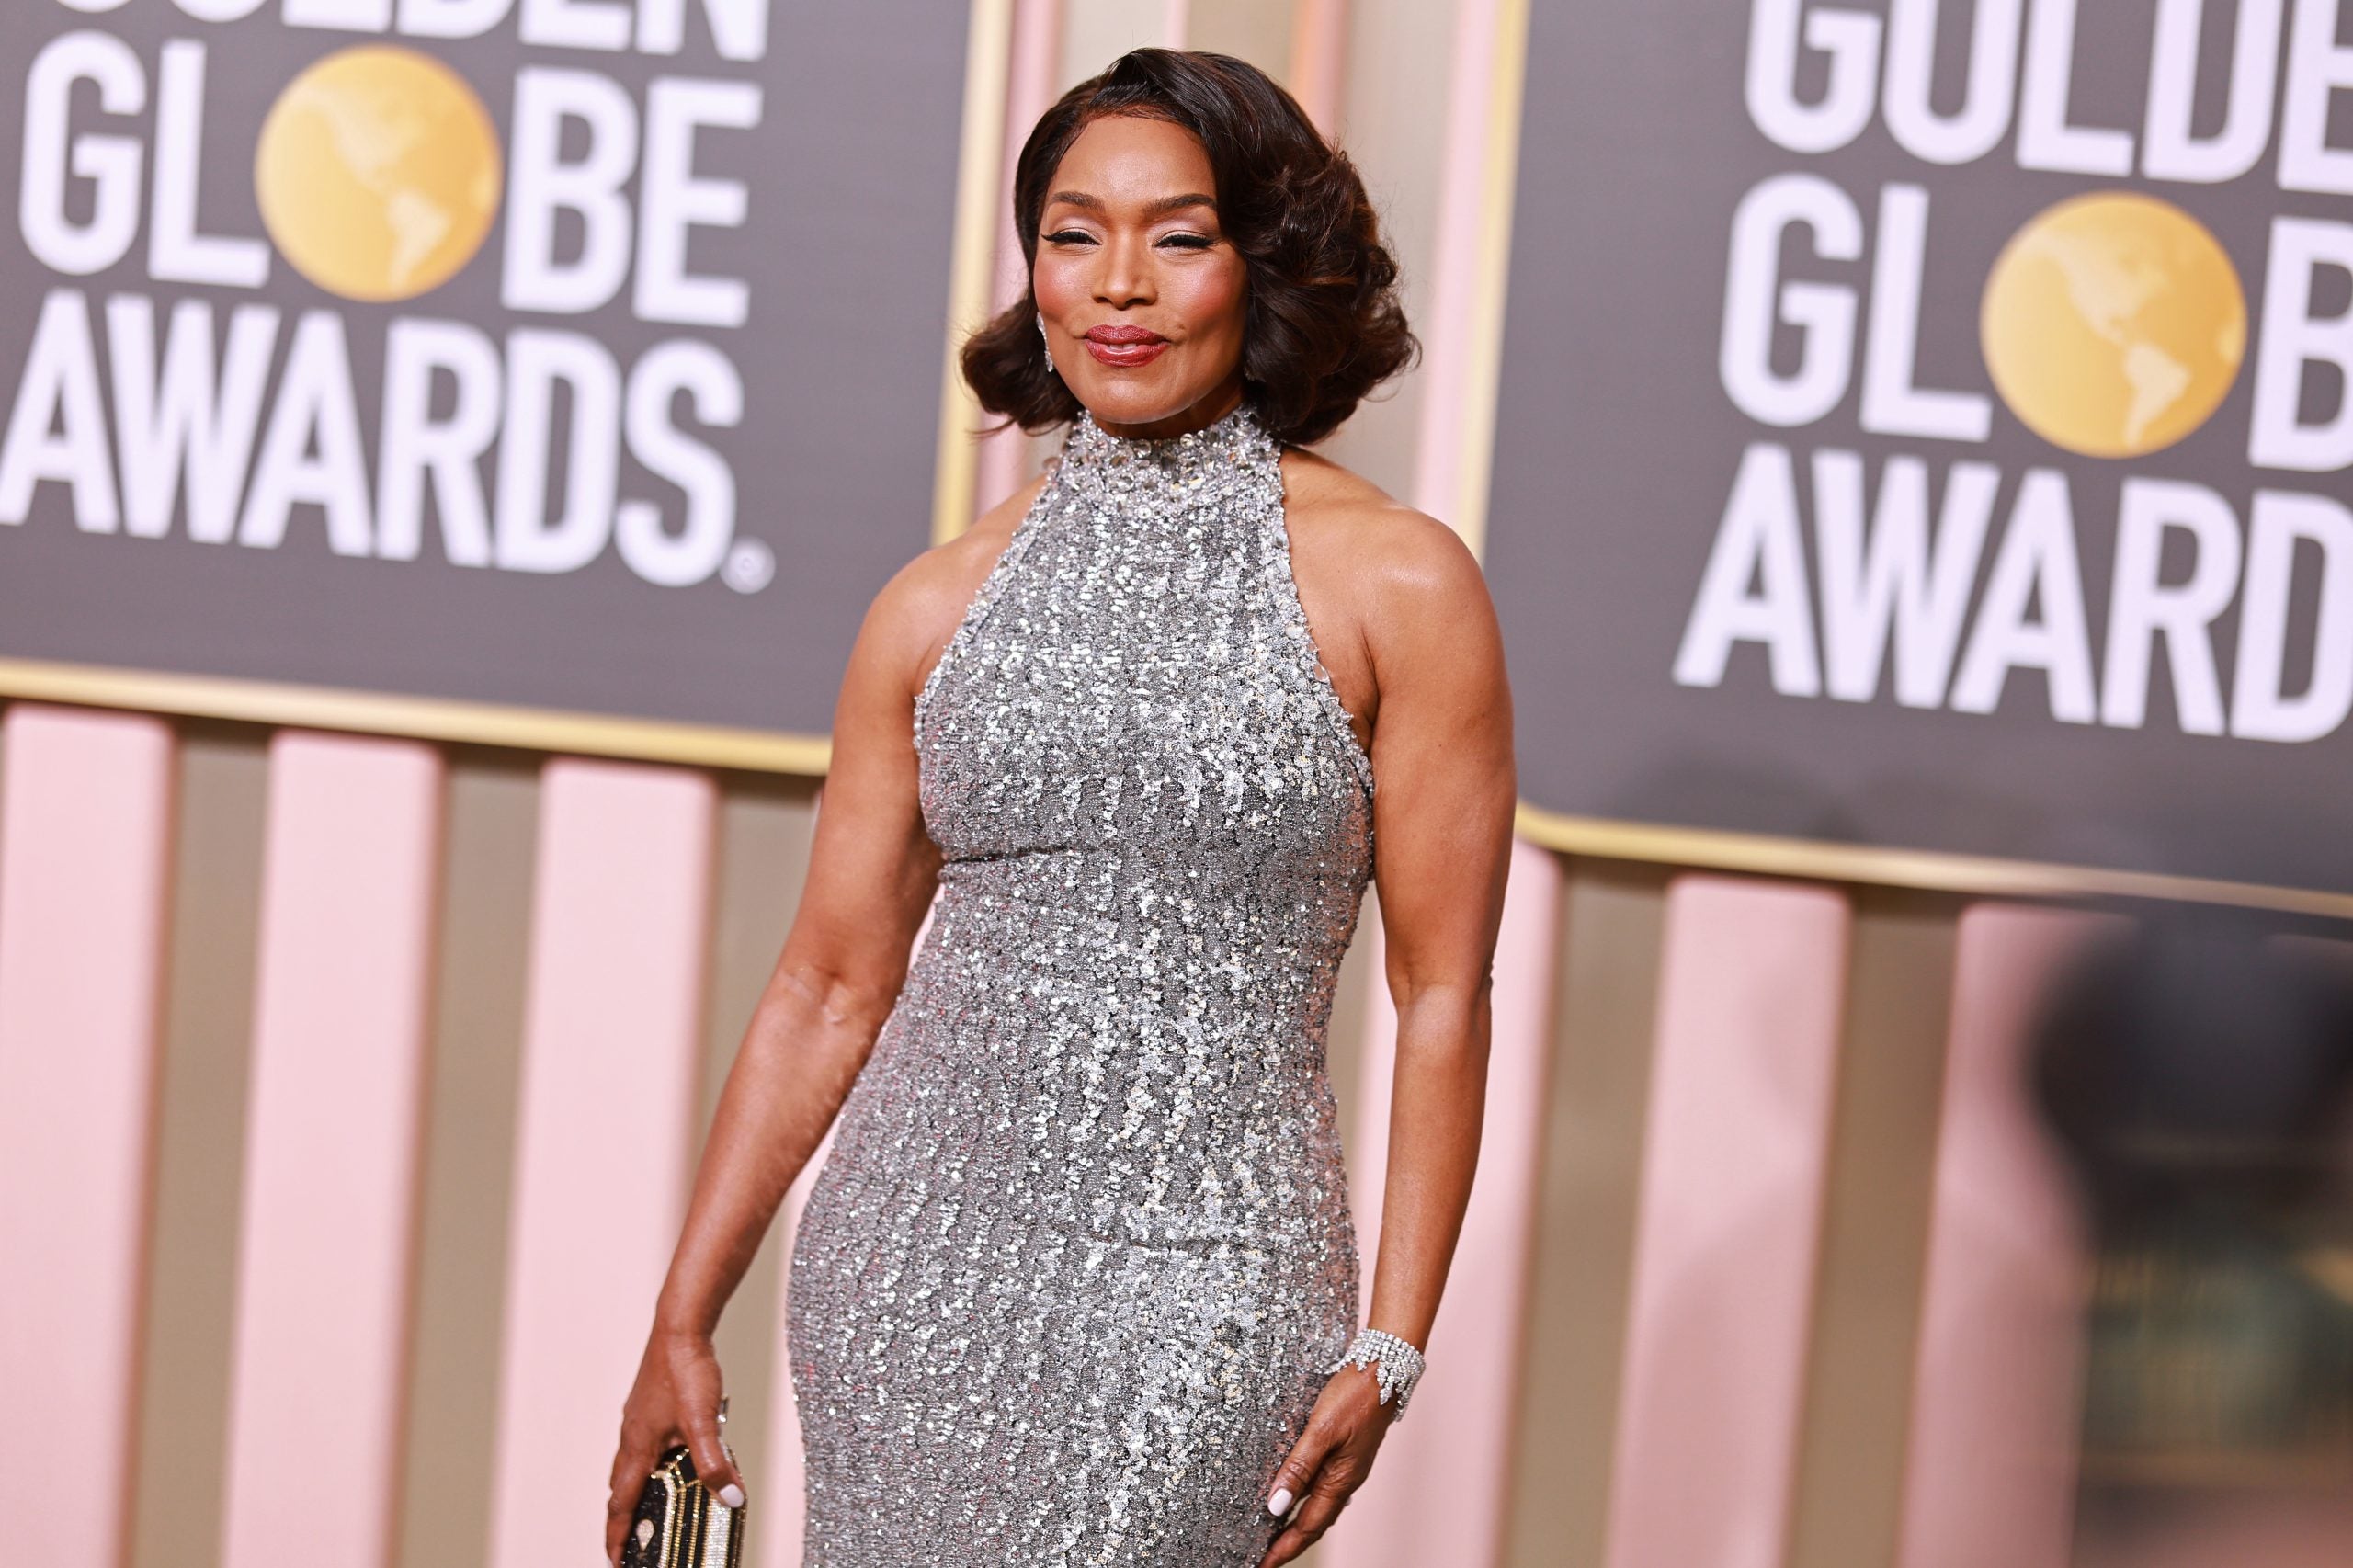 Angela Bassett Wins Golden Globe for Best Supporting Actress for ‘Wakanda Forever’: “This Award Belongs To All Of Us”